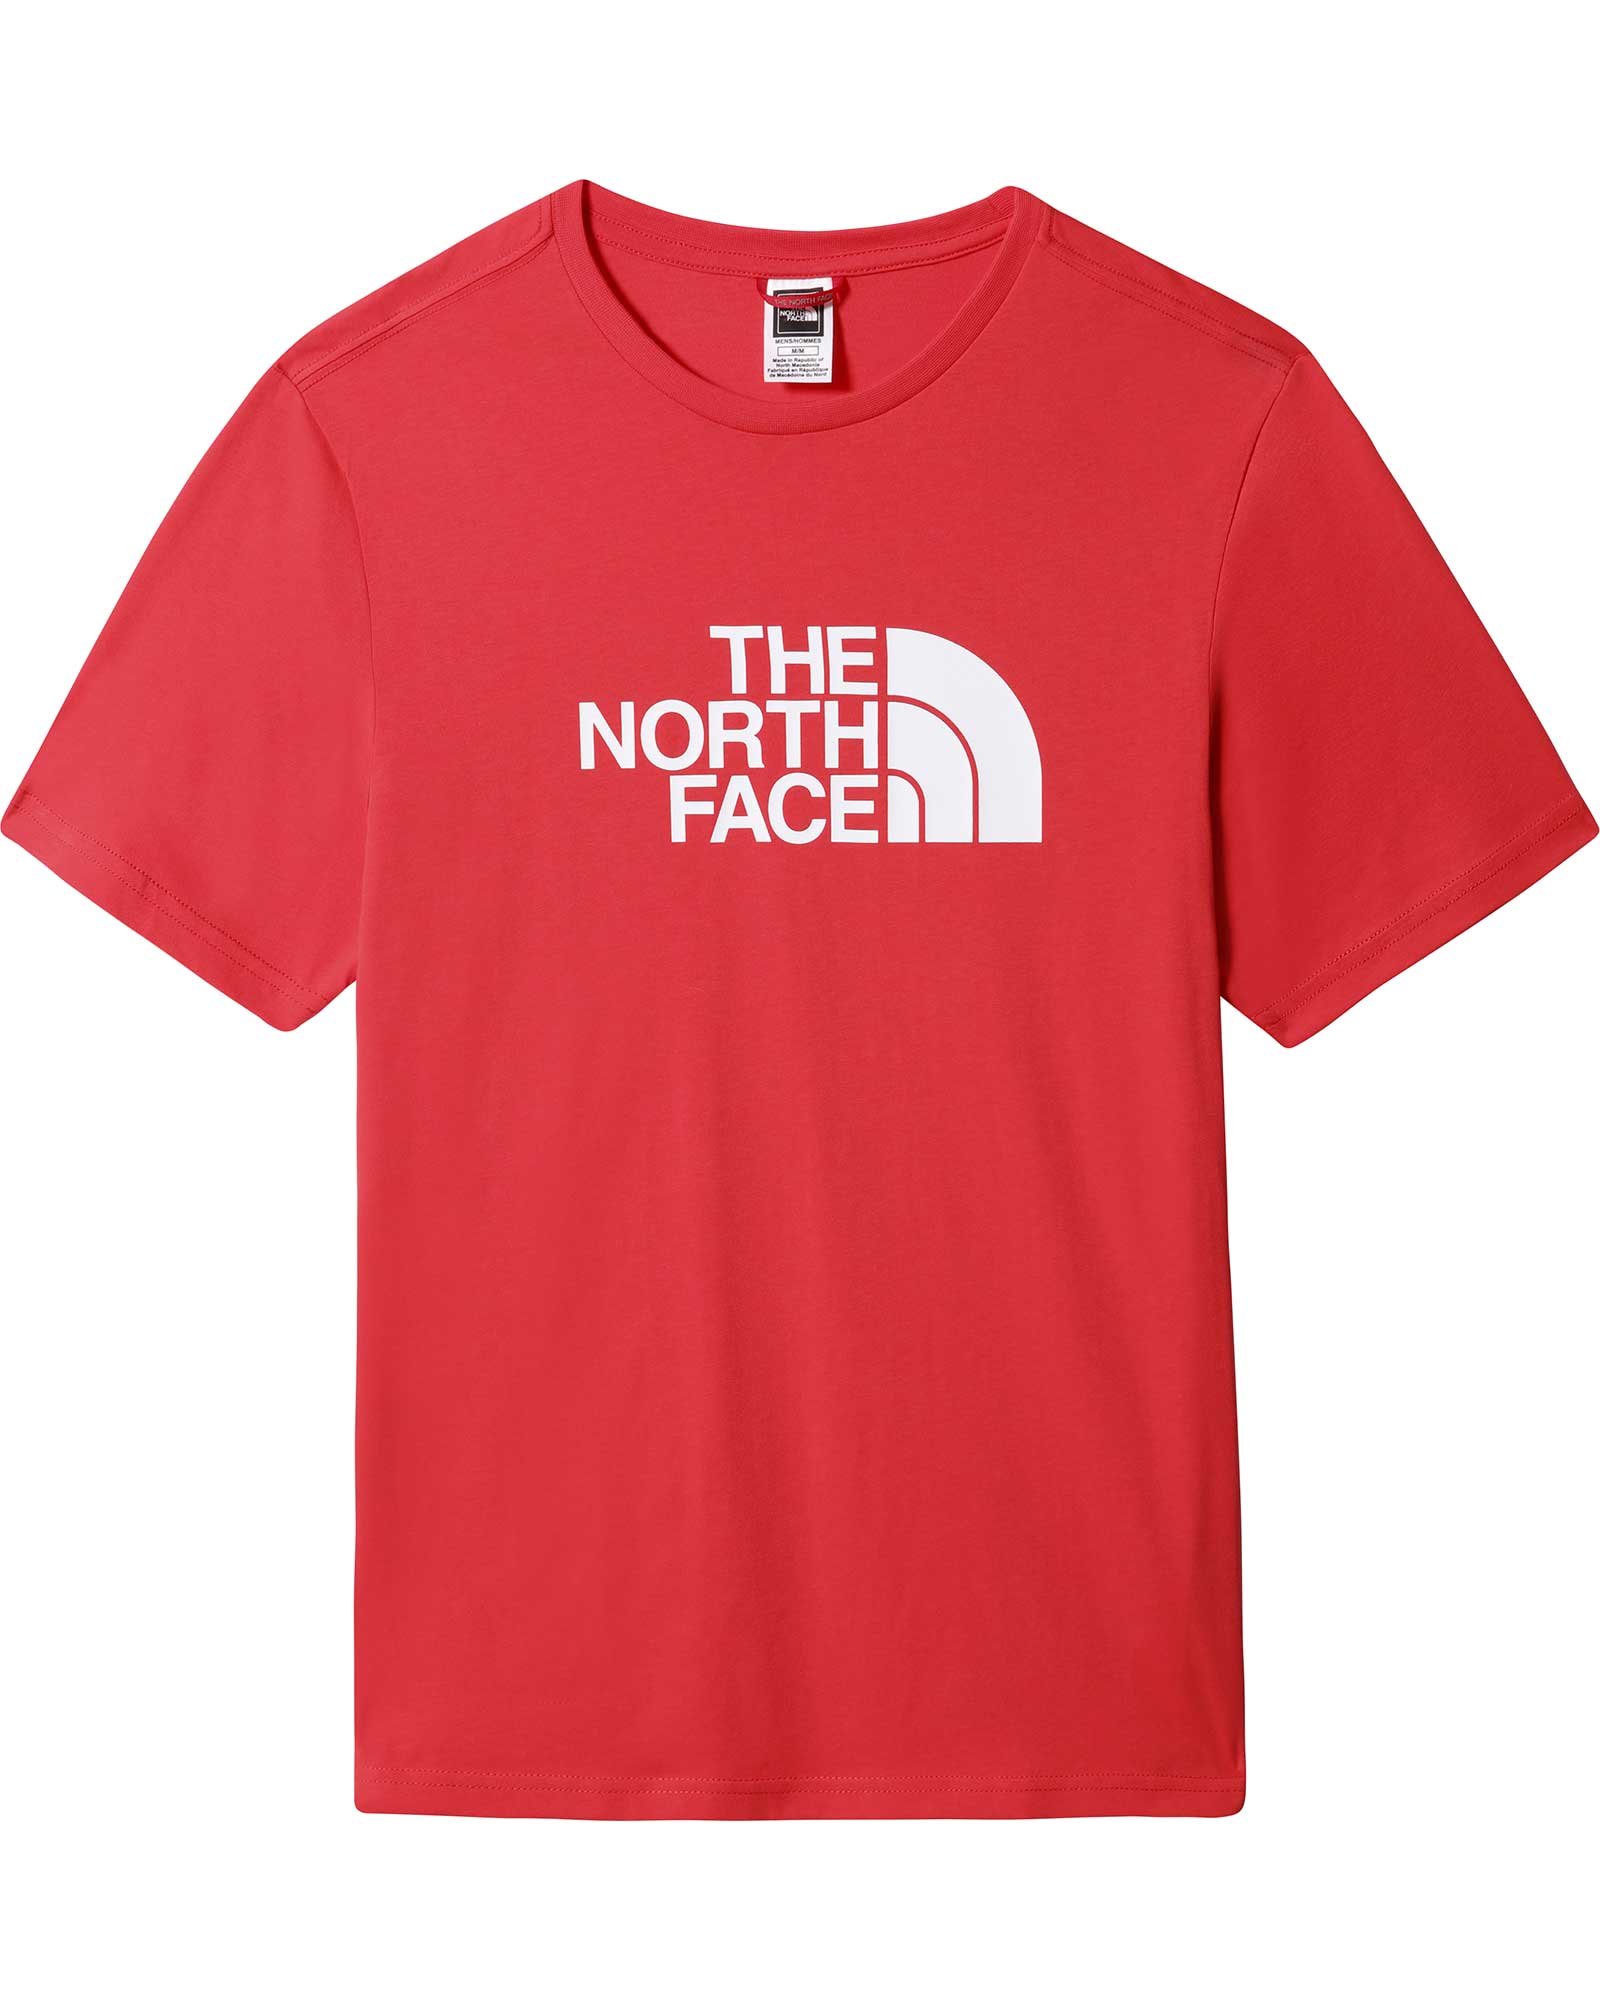 The North Face Easy Men’s T Shirt - Horizon Red M